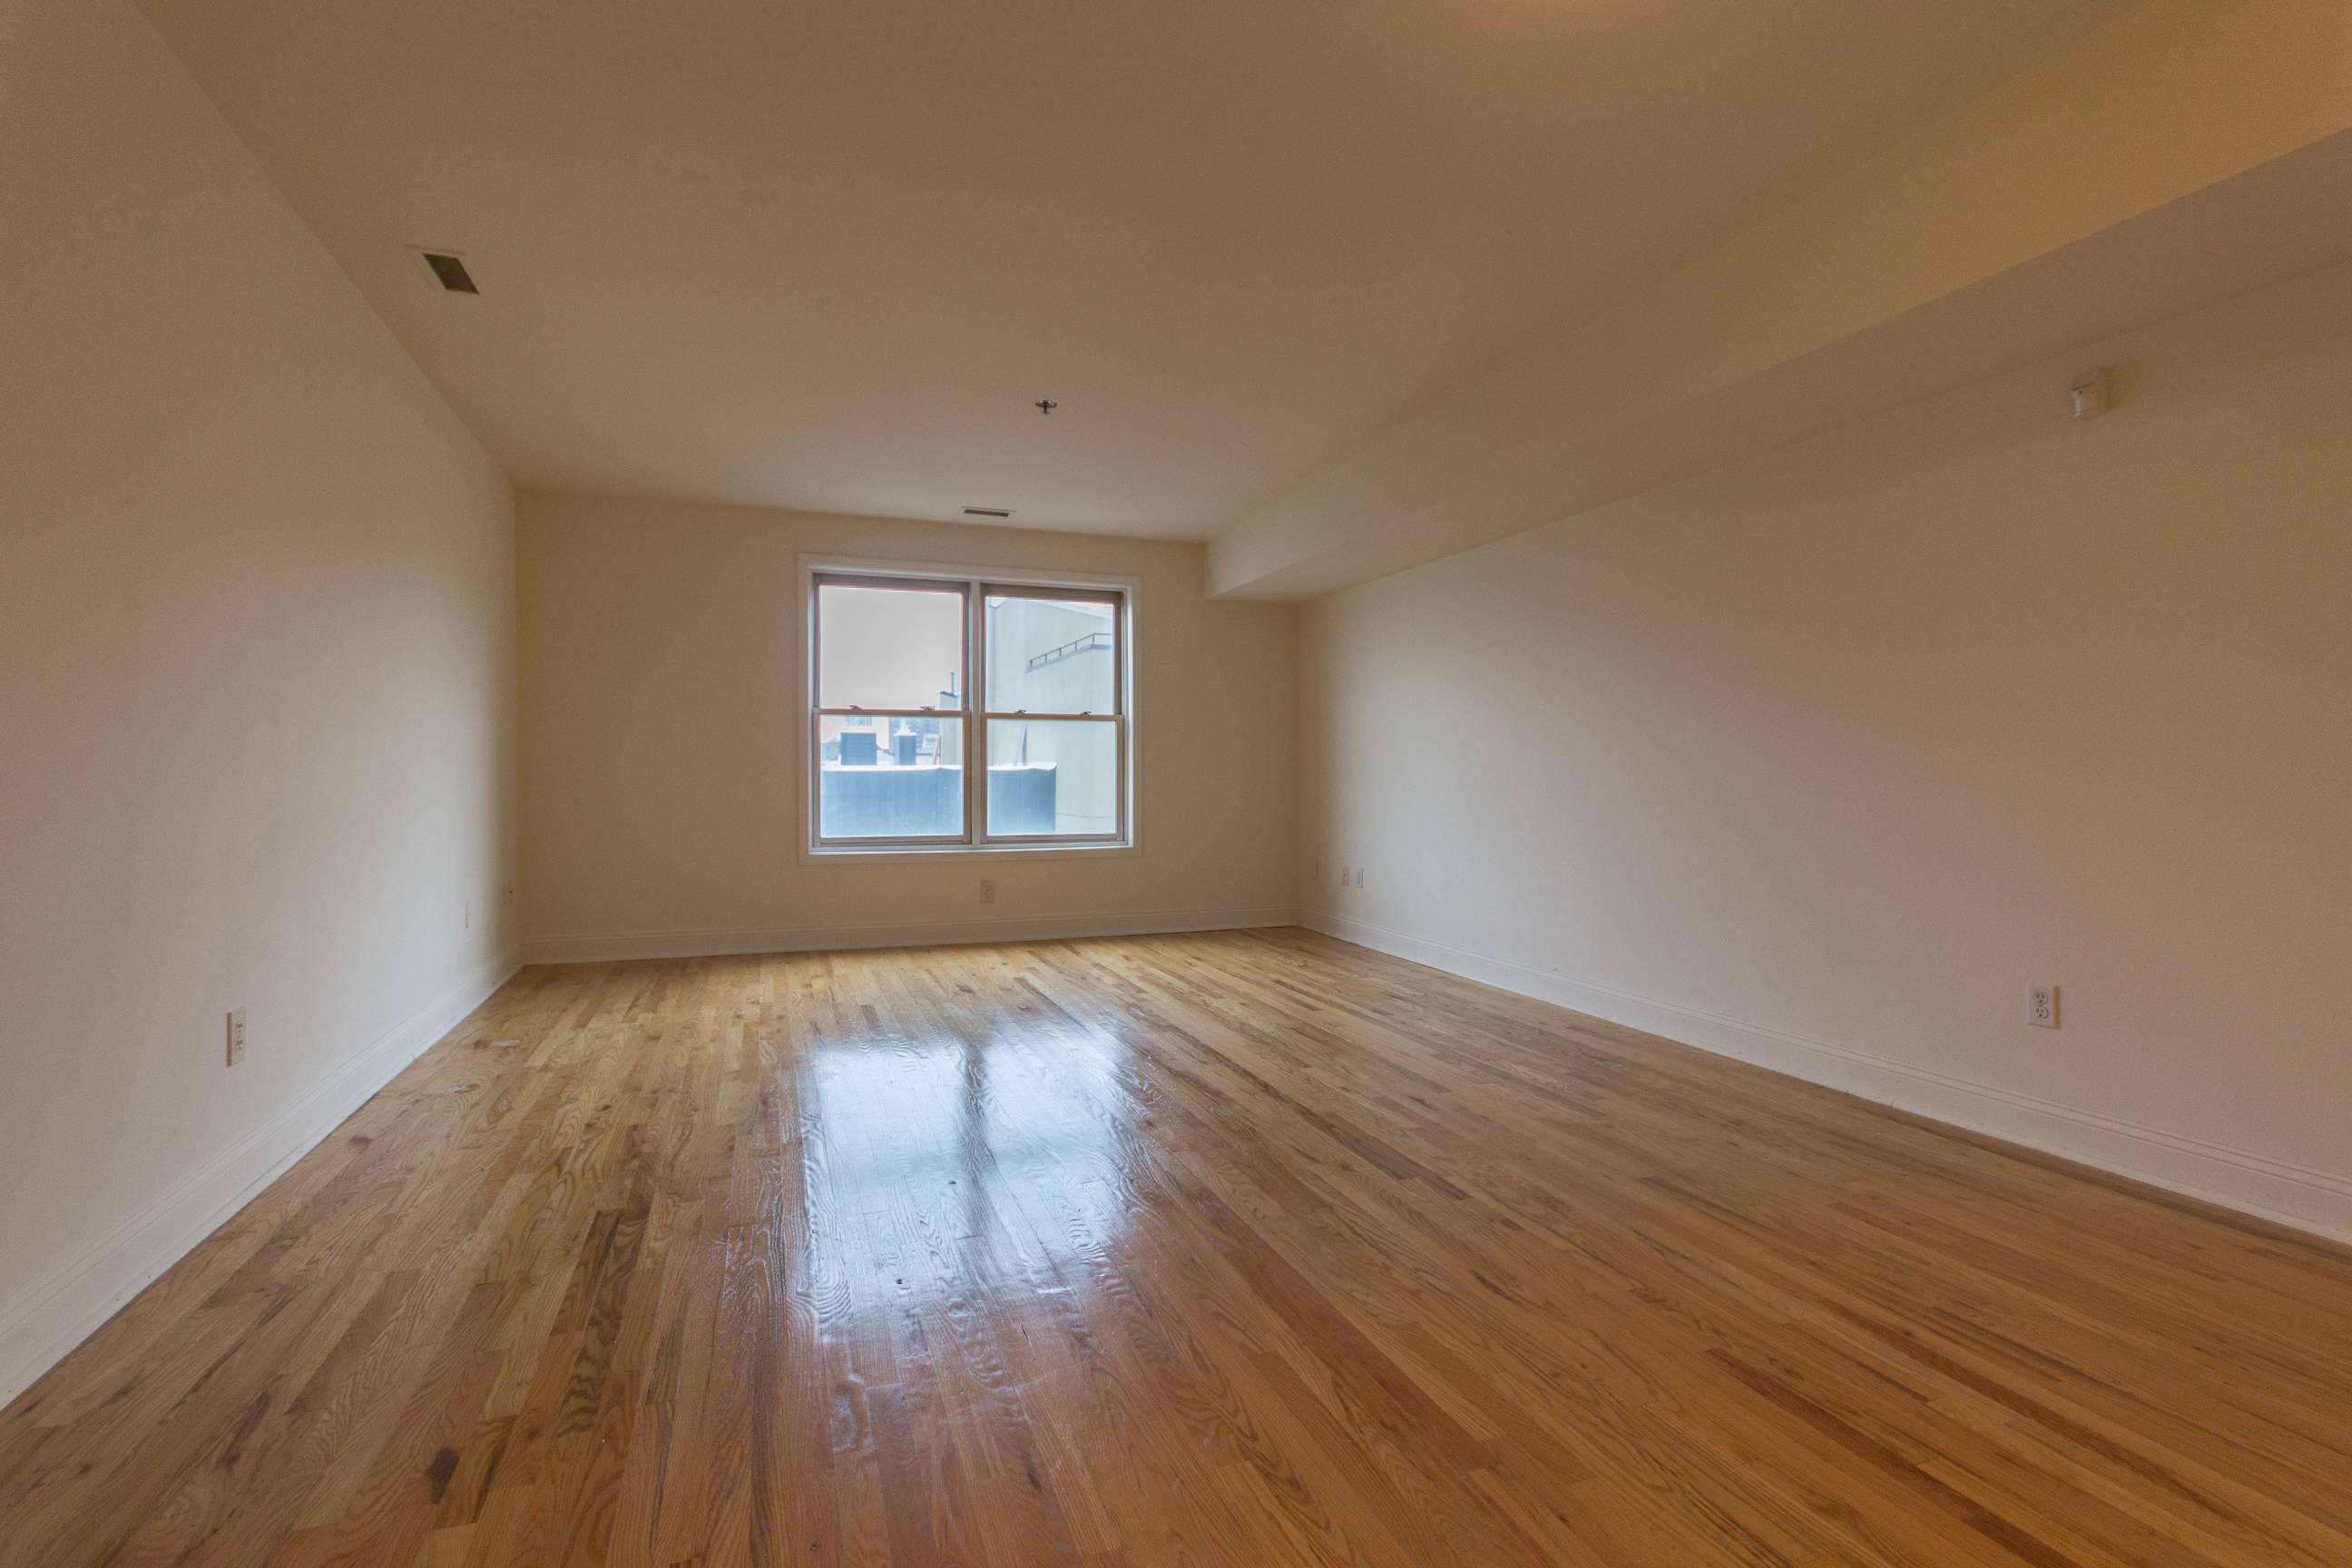 Huge 2BR/2BA Unit in Downtown Hoboken!  NYC VIEWS!  No Fee! Laundry, Elevator, and Parking on Site!